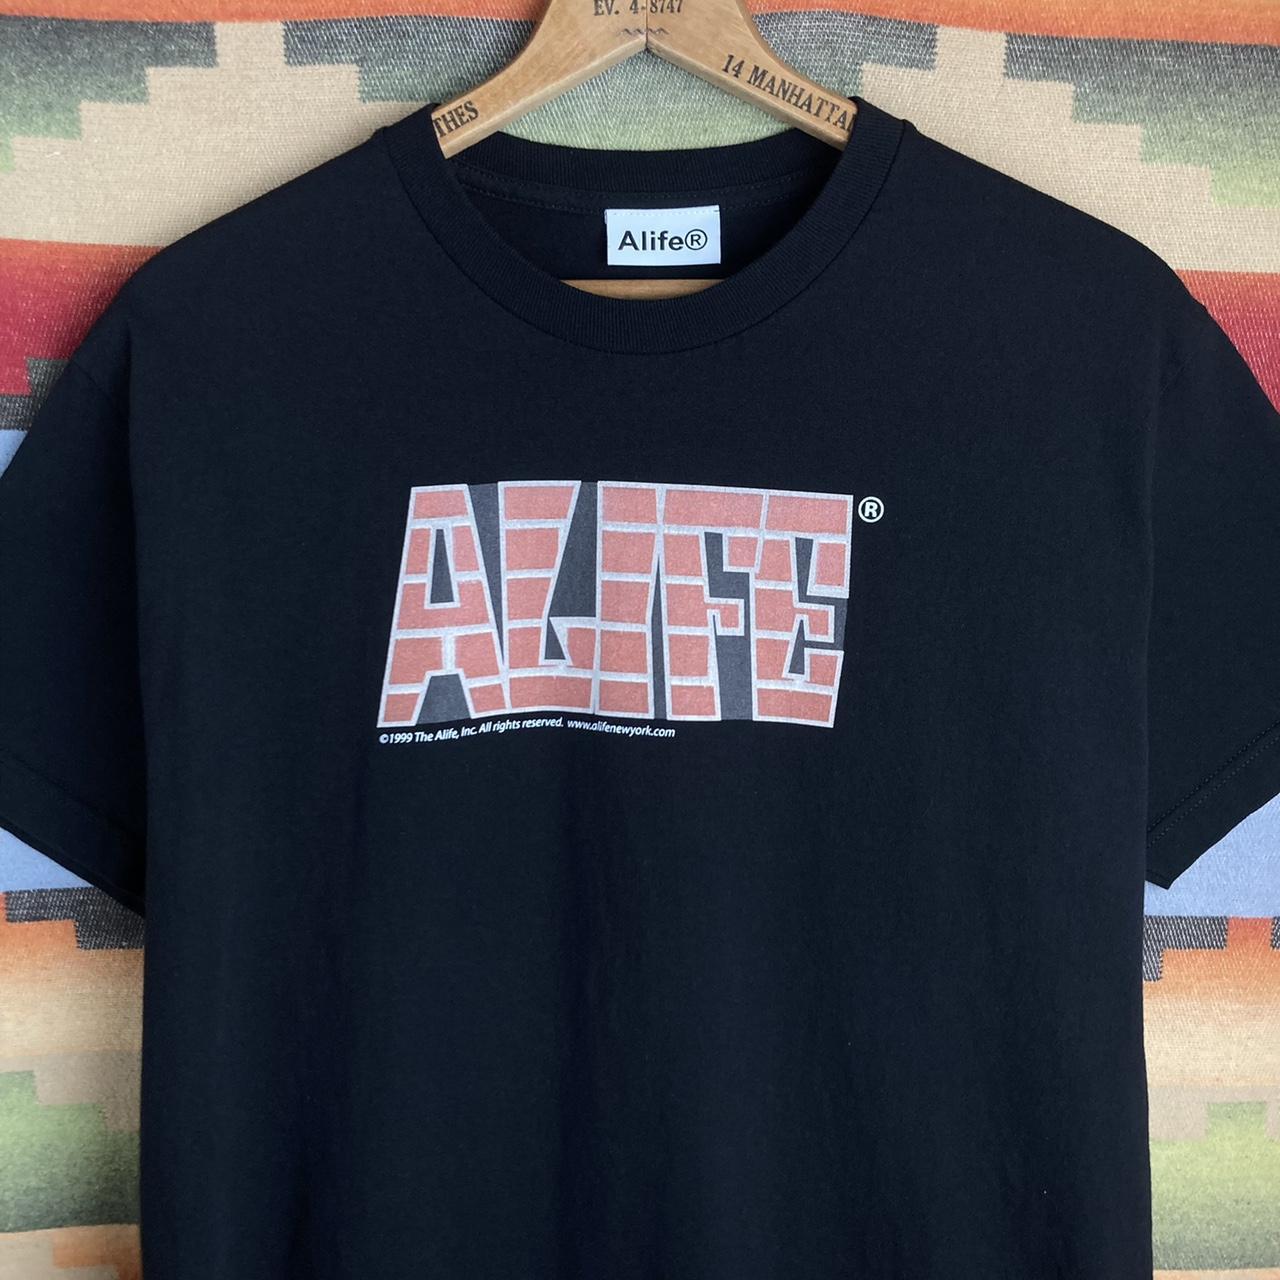 Alife Men's Black and Red T-shirt